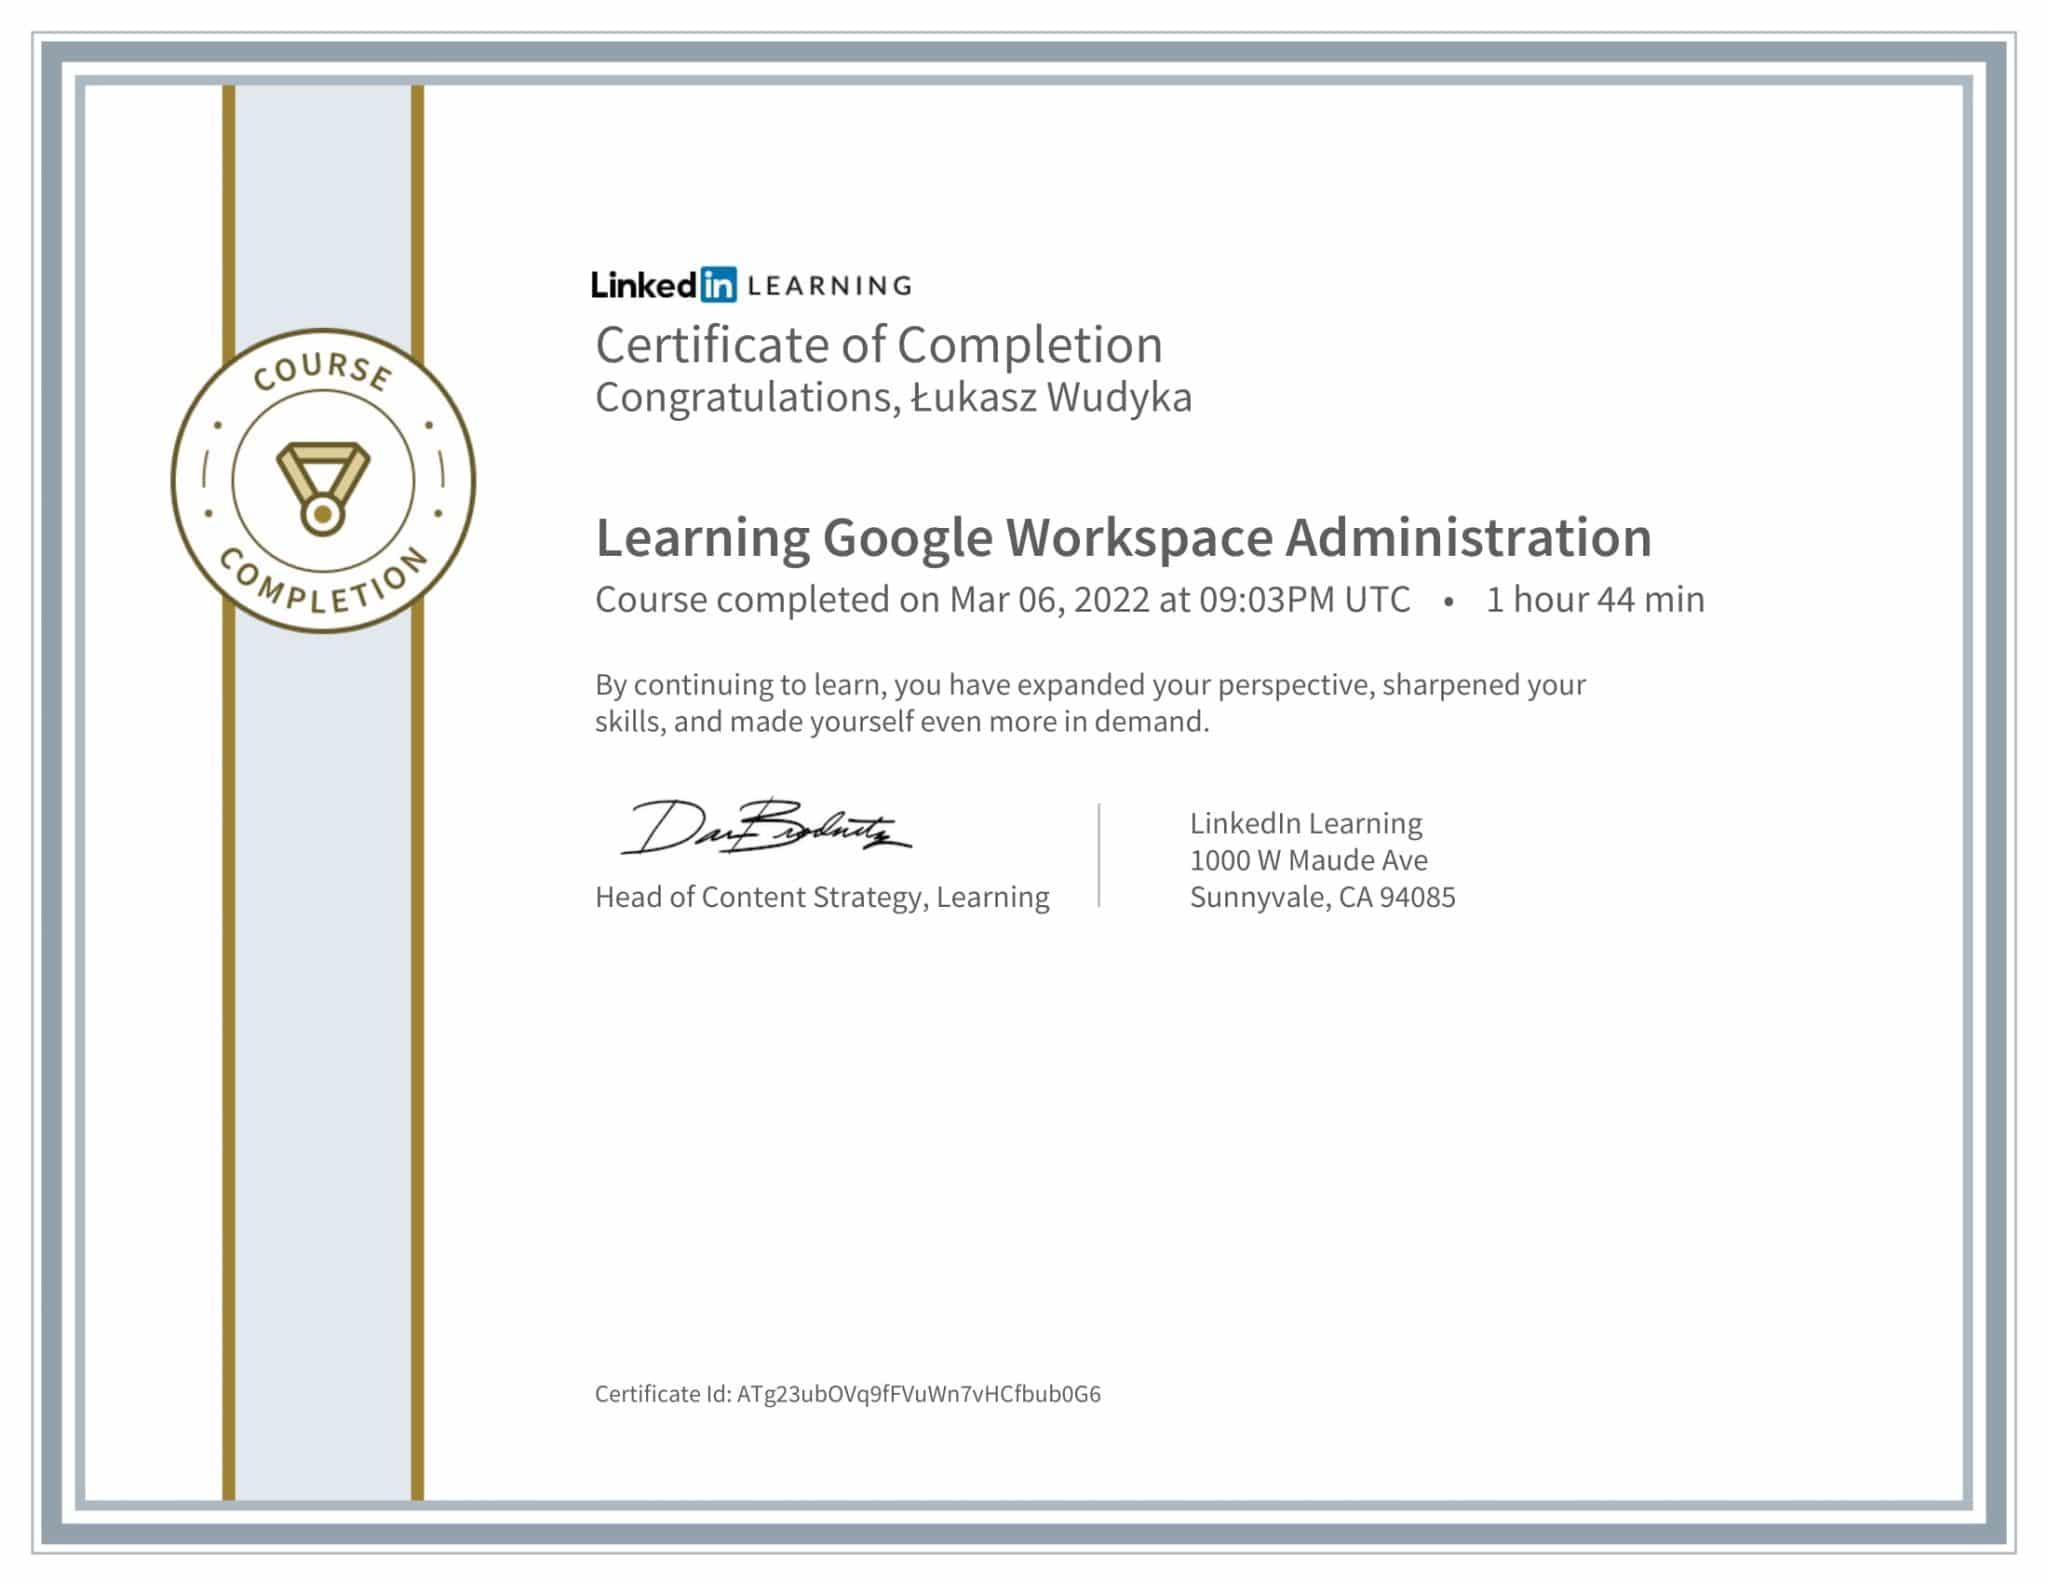 CertificateOfCompletion_Learning Google Workspace Administration-1